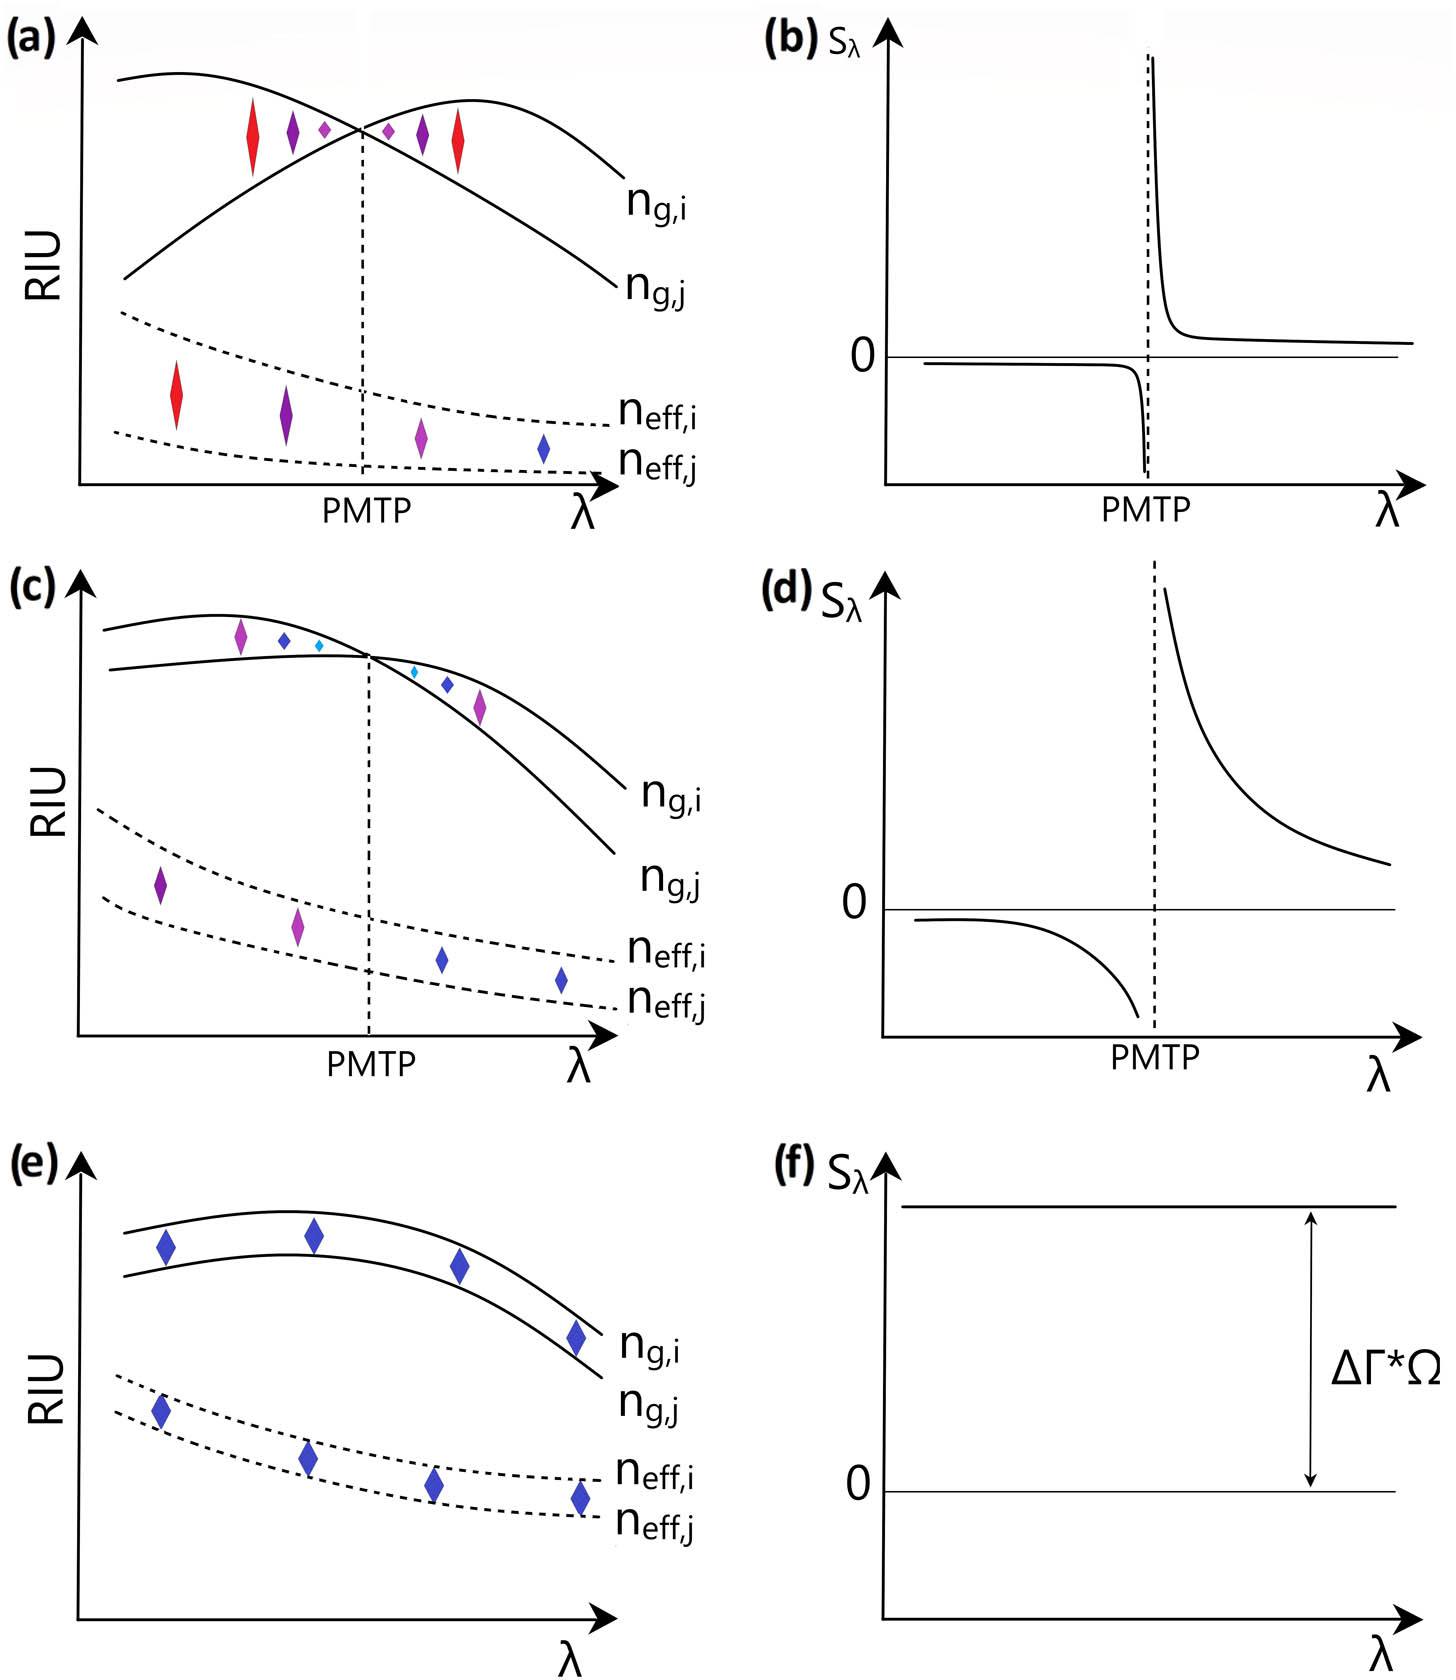 Illustration of spectral sensitivity optimization behavior. (a), (c), (e) Different propagation constant spectral profiles and (b), (d), (f) subsequent expected sensitivity behavior versus wavelength.